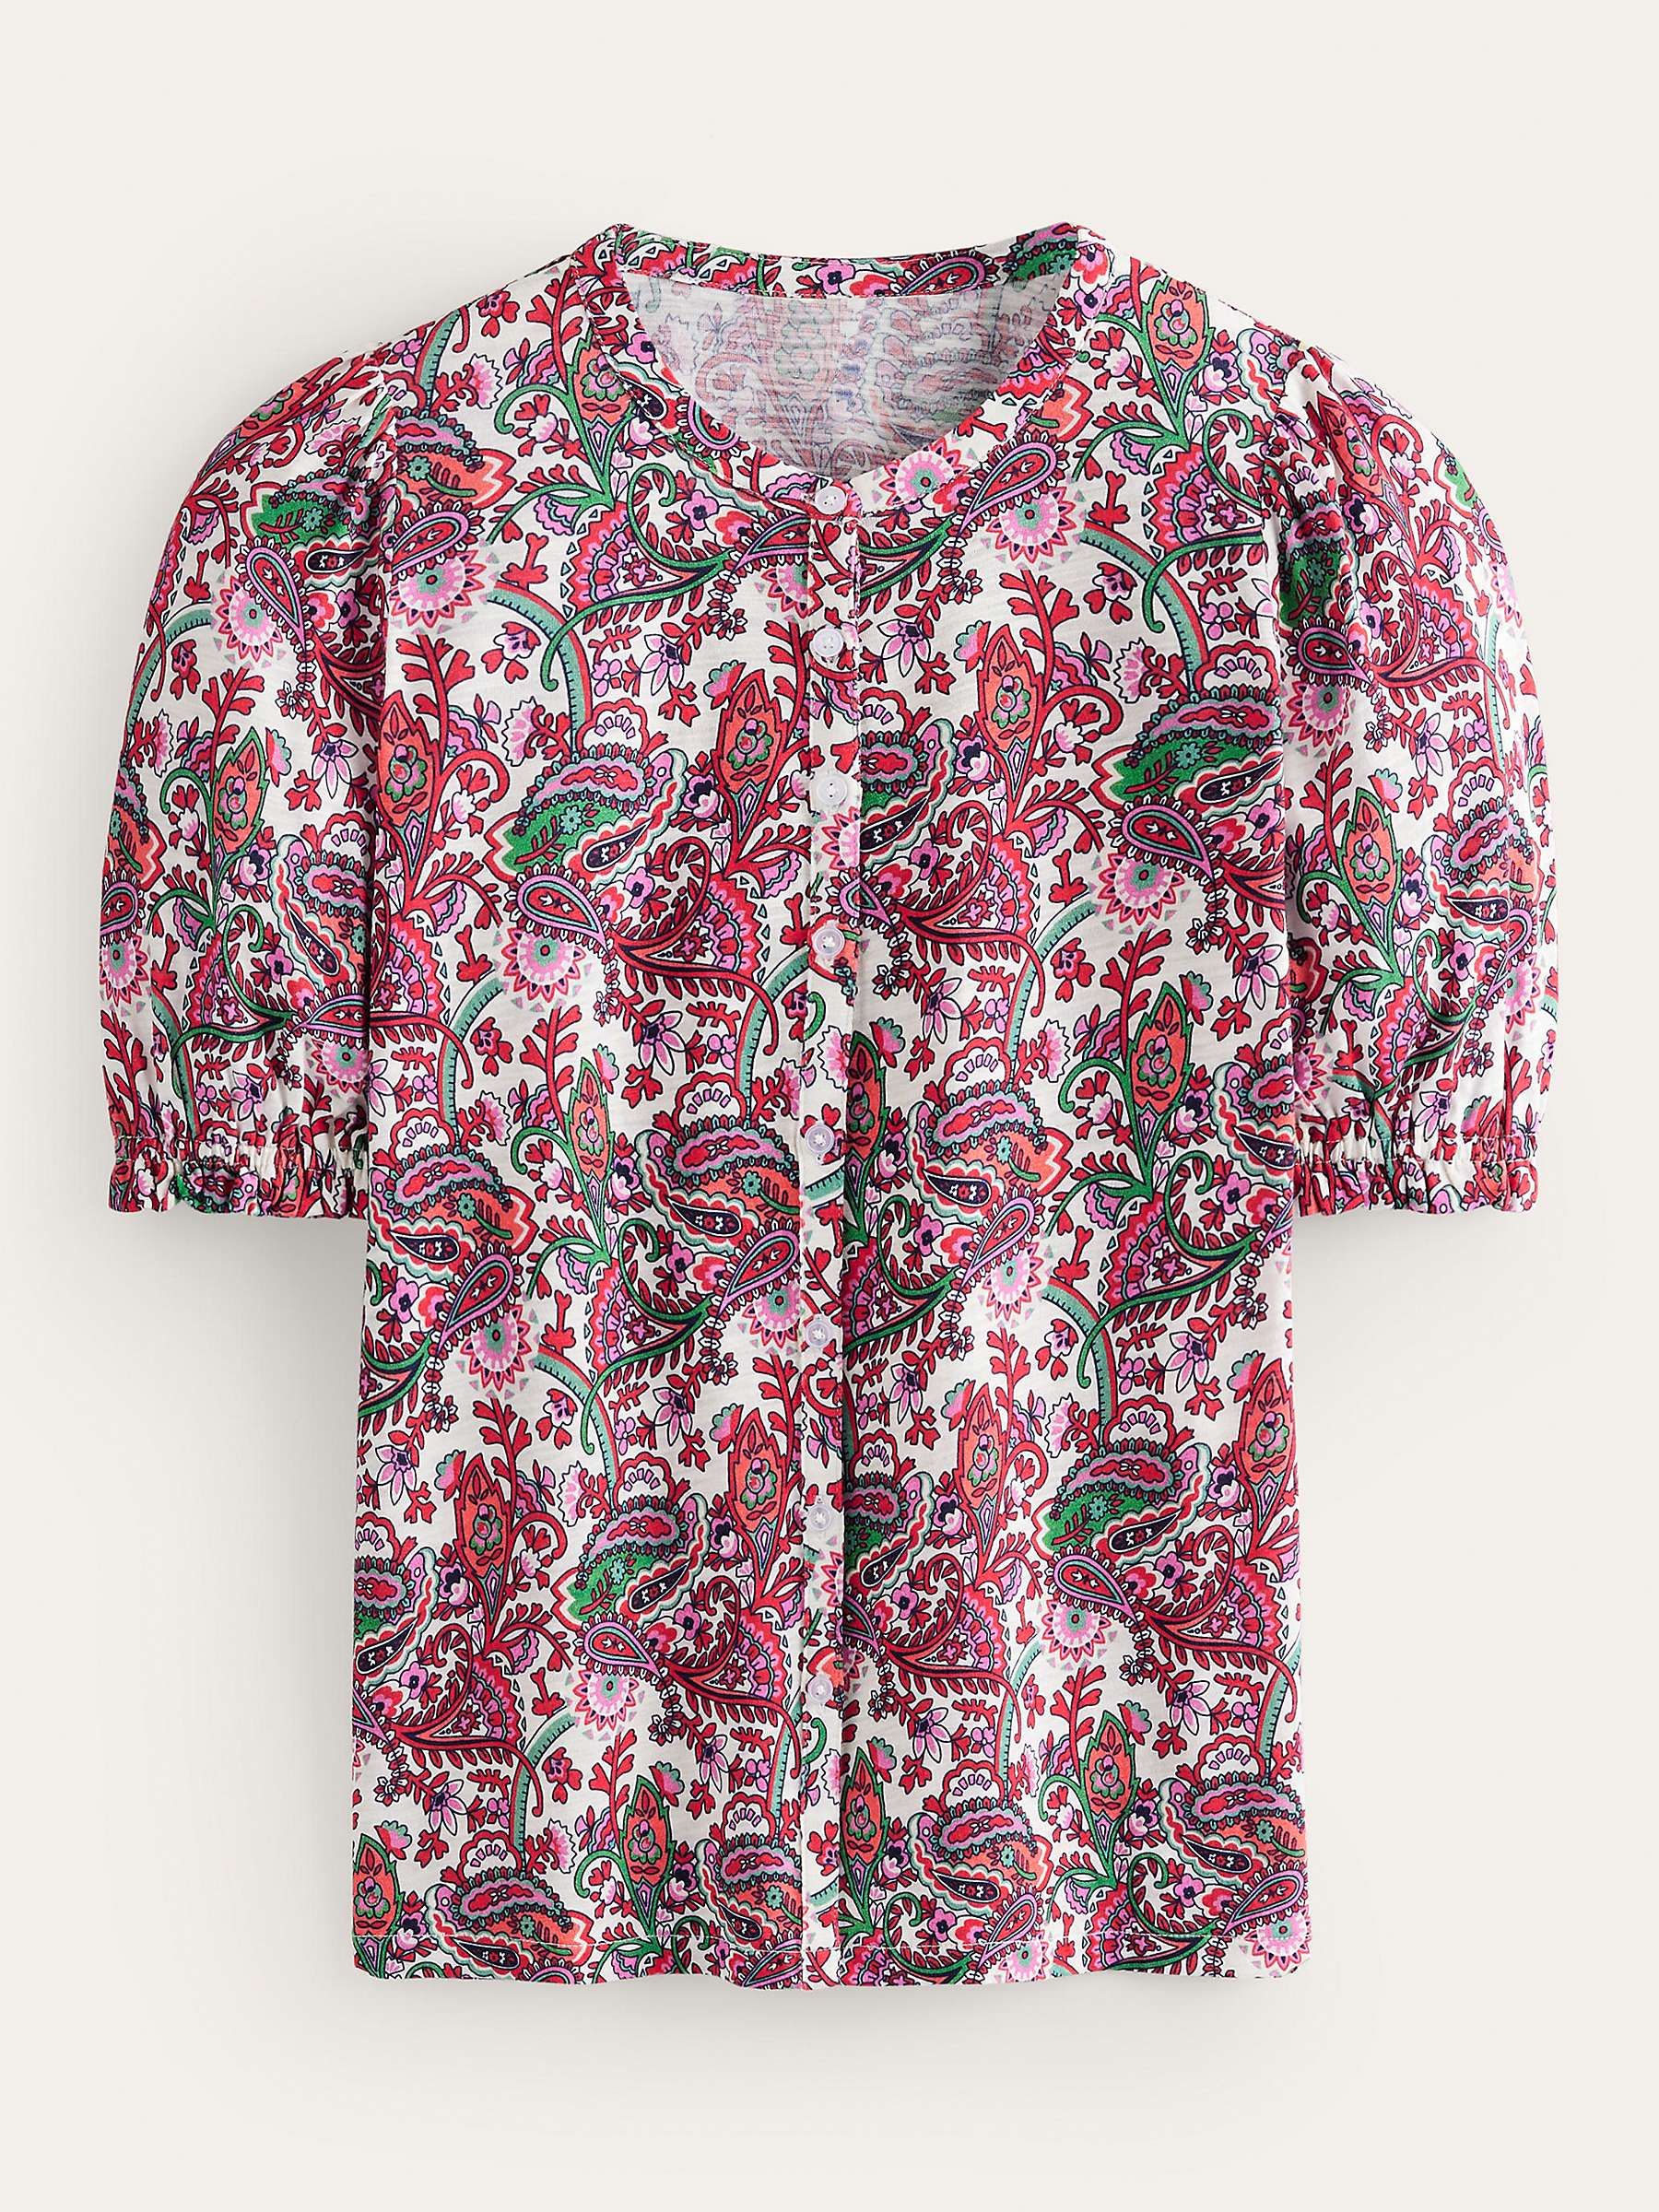 Buy Boden Dolly Puff Sleeve Jersey Shirt, Multi Fantastical Online at johnlewis.com